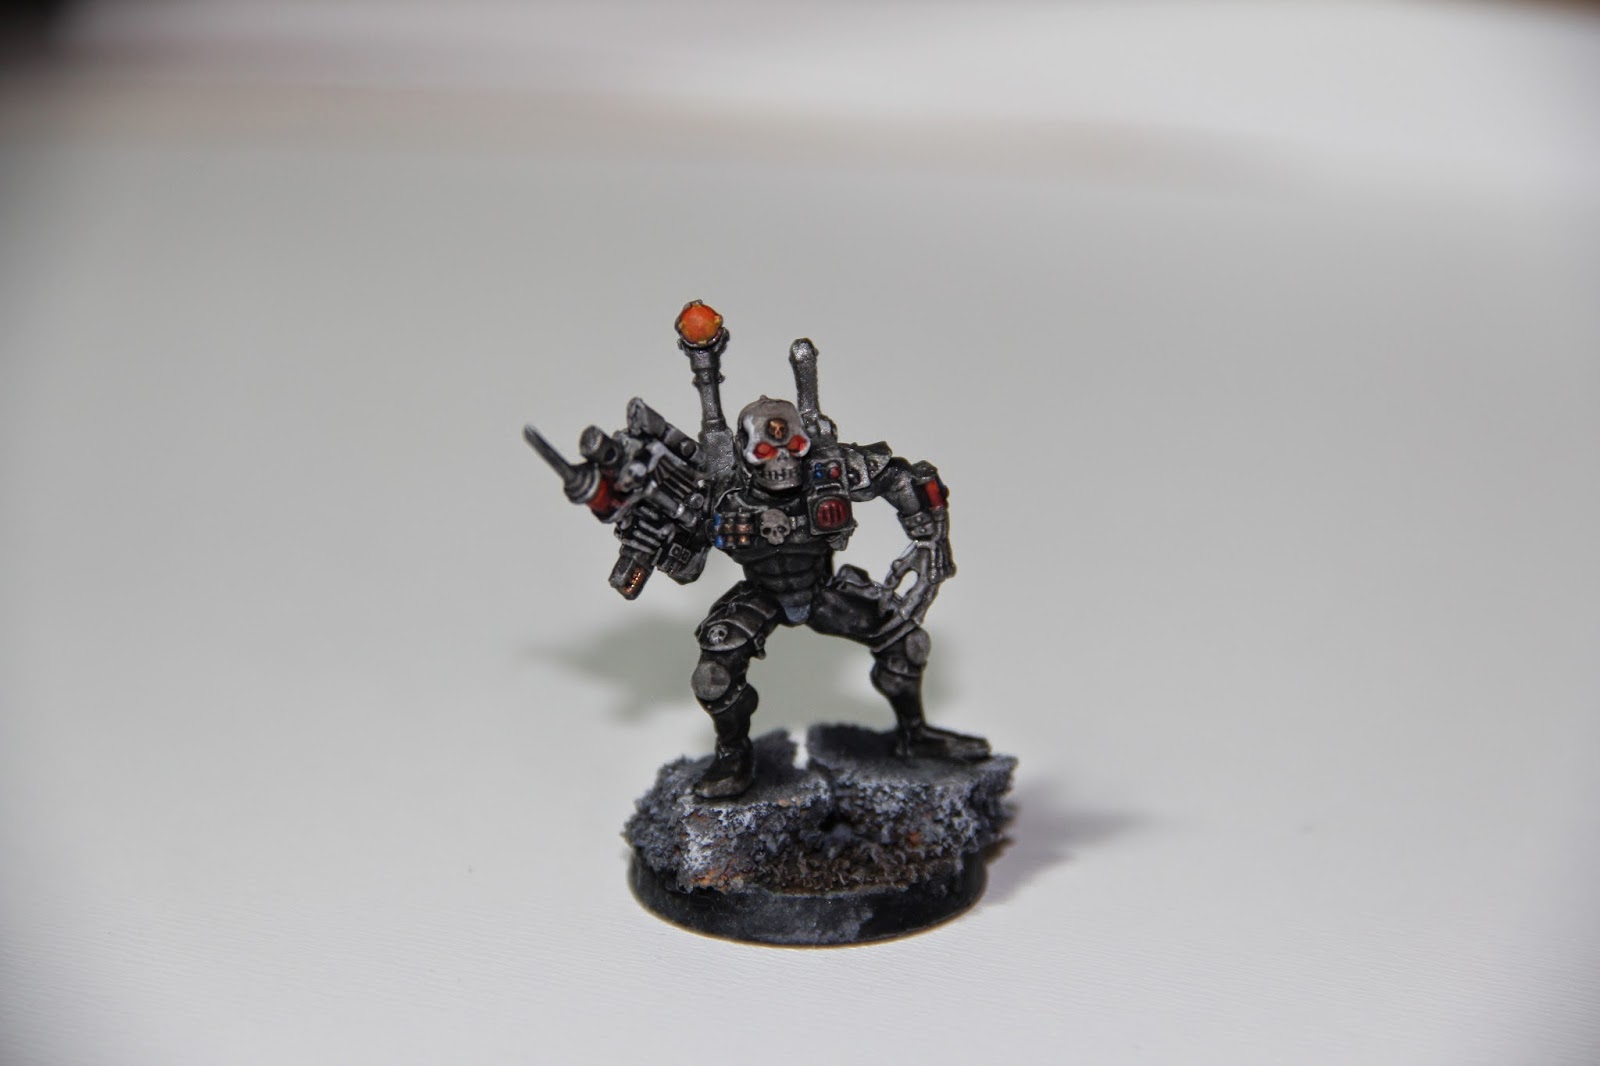 Wash of Agrax Earthshade to the base, and a was of 1:2 Abbadon